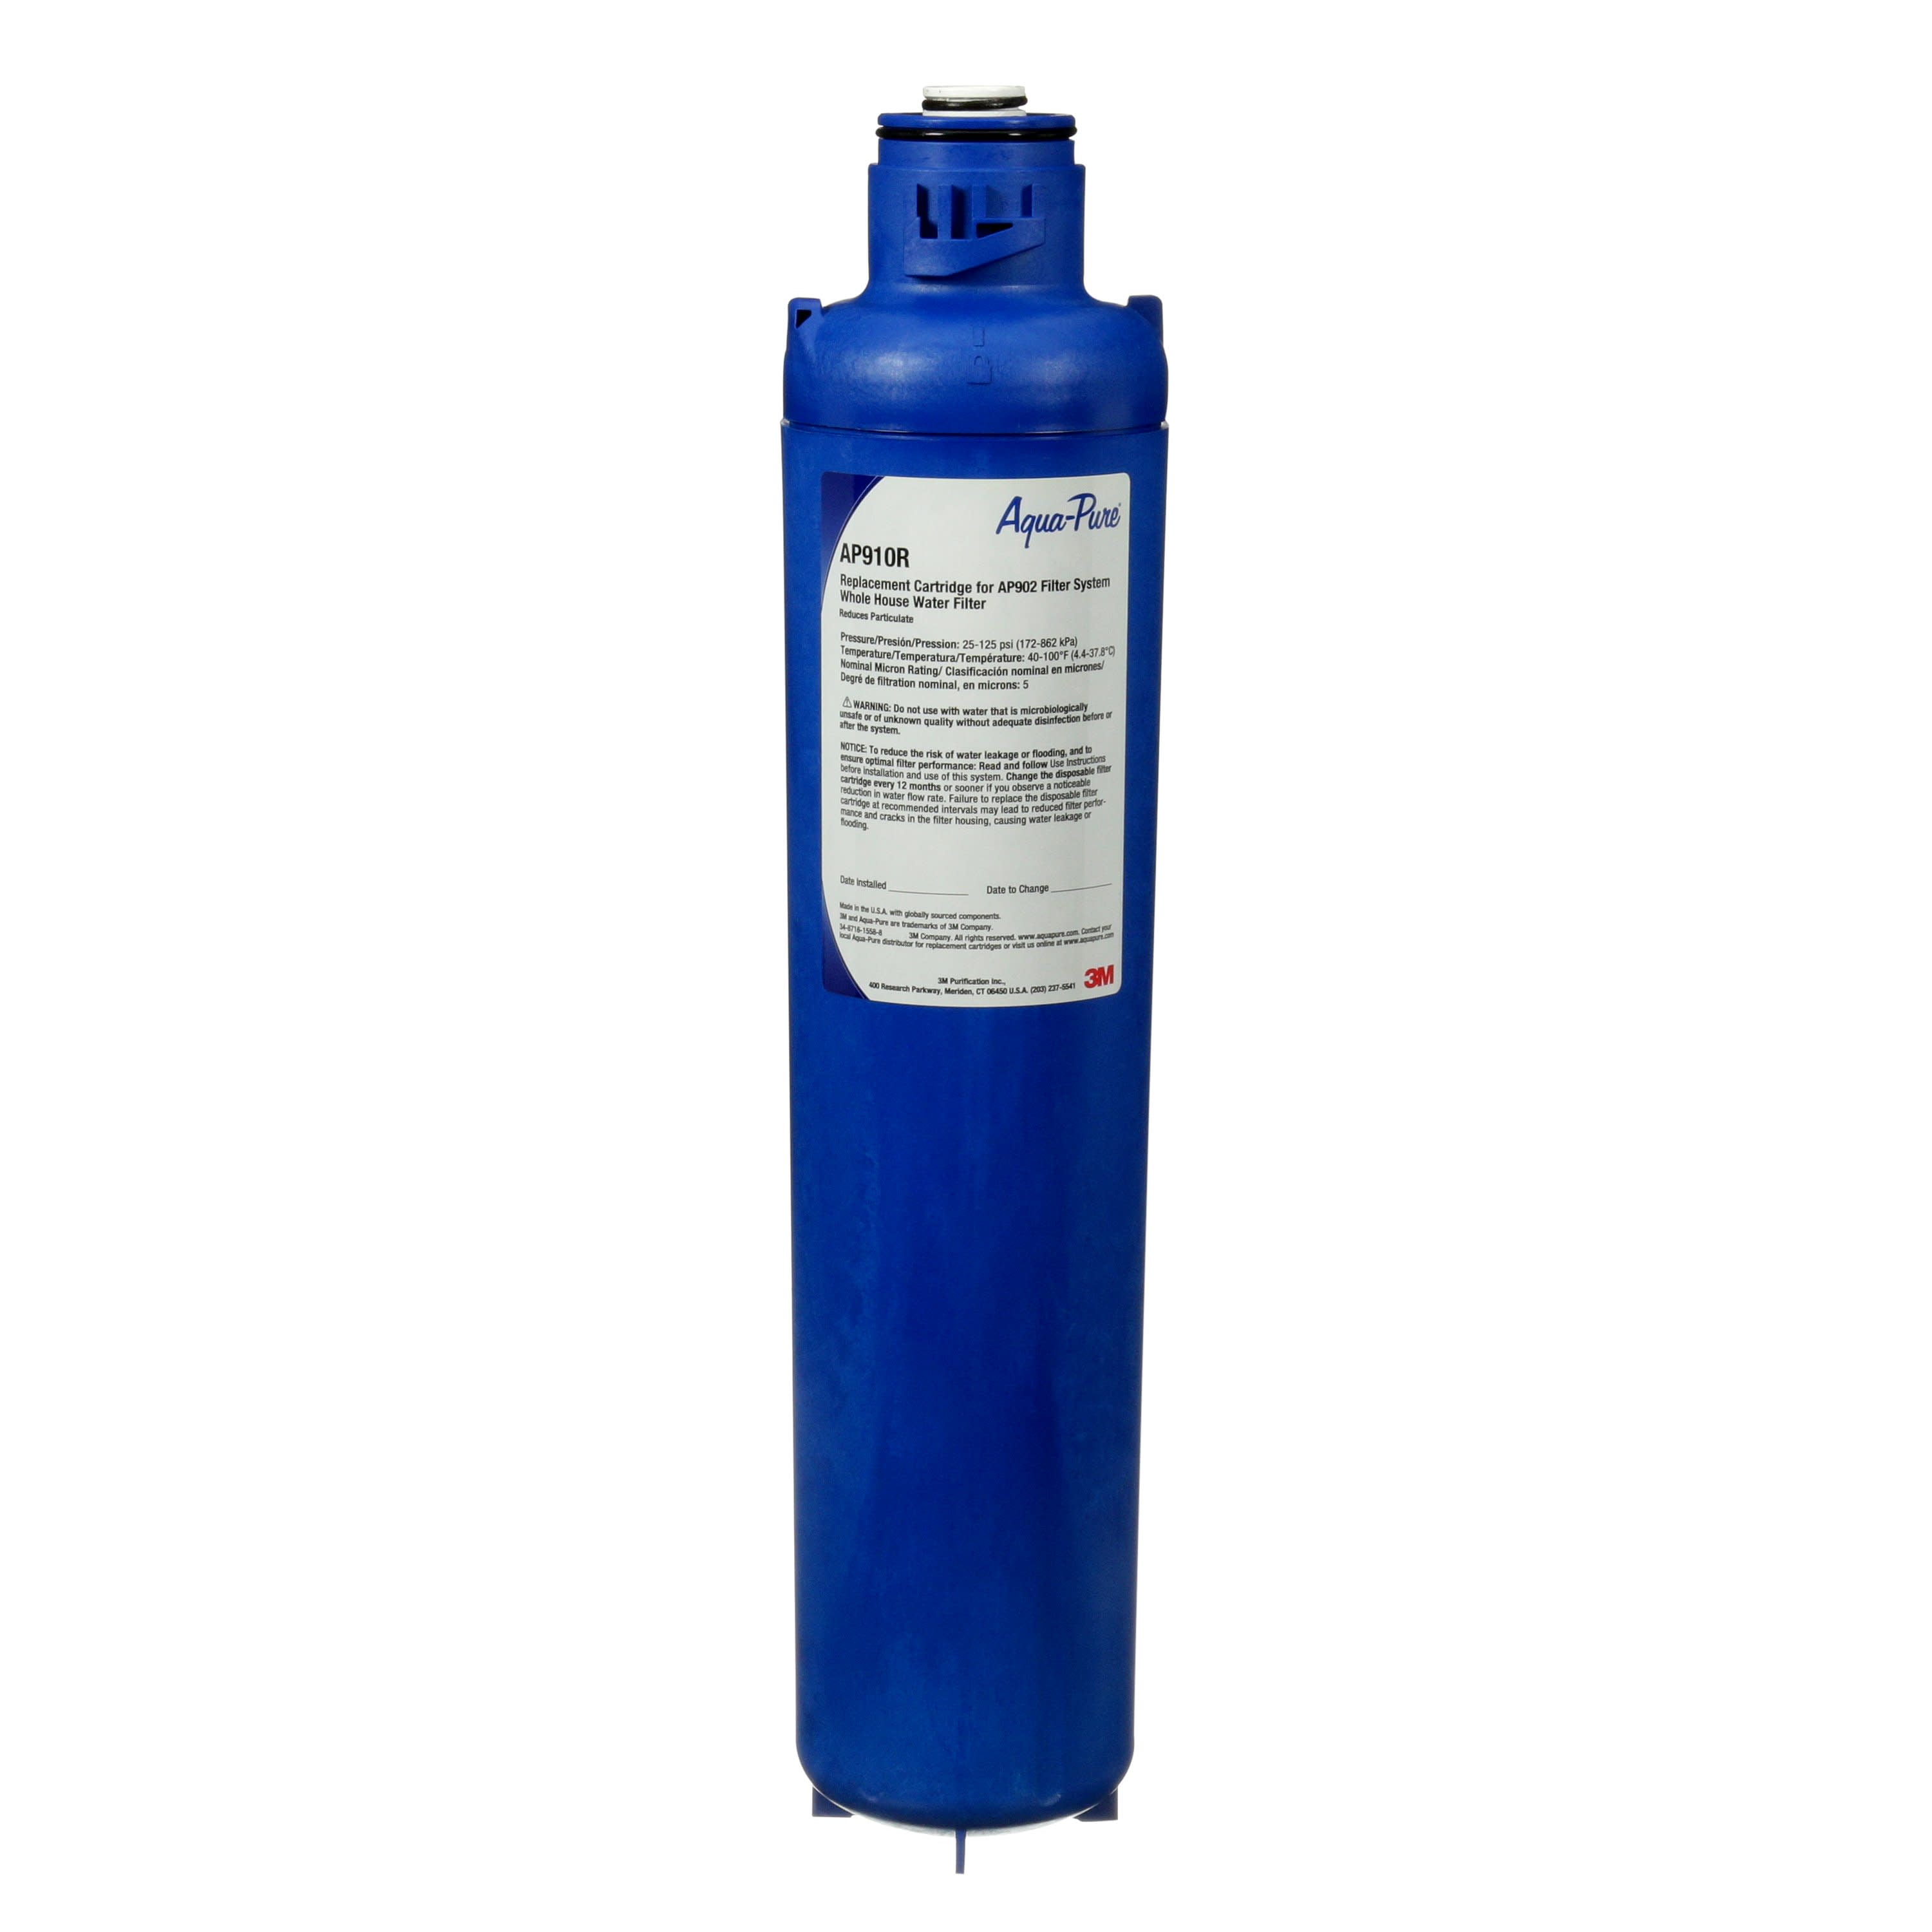 3M AP2-C401-SG Compatible Water Filter from SpringClear Ltd SPC-02-2 PACK